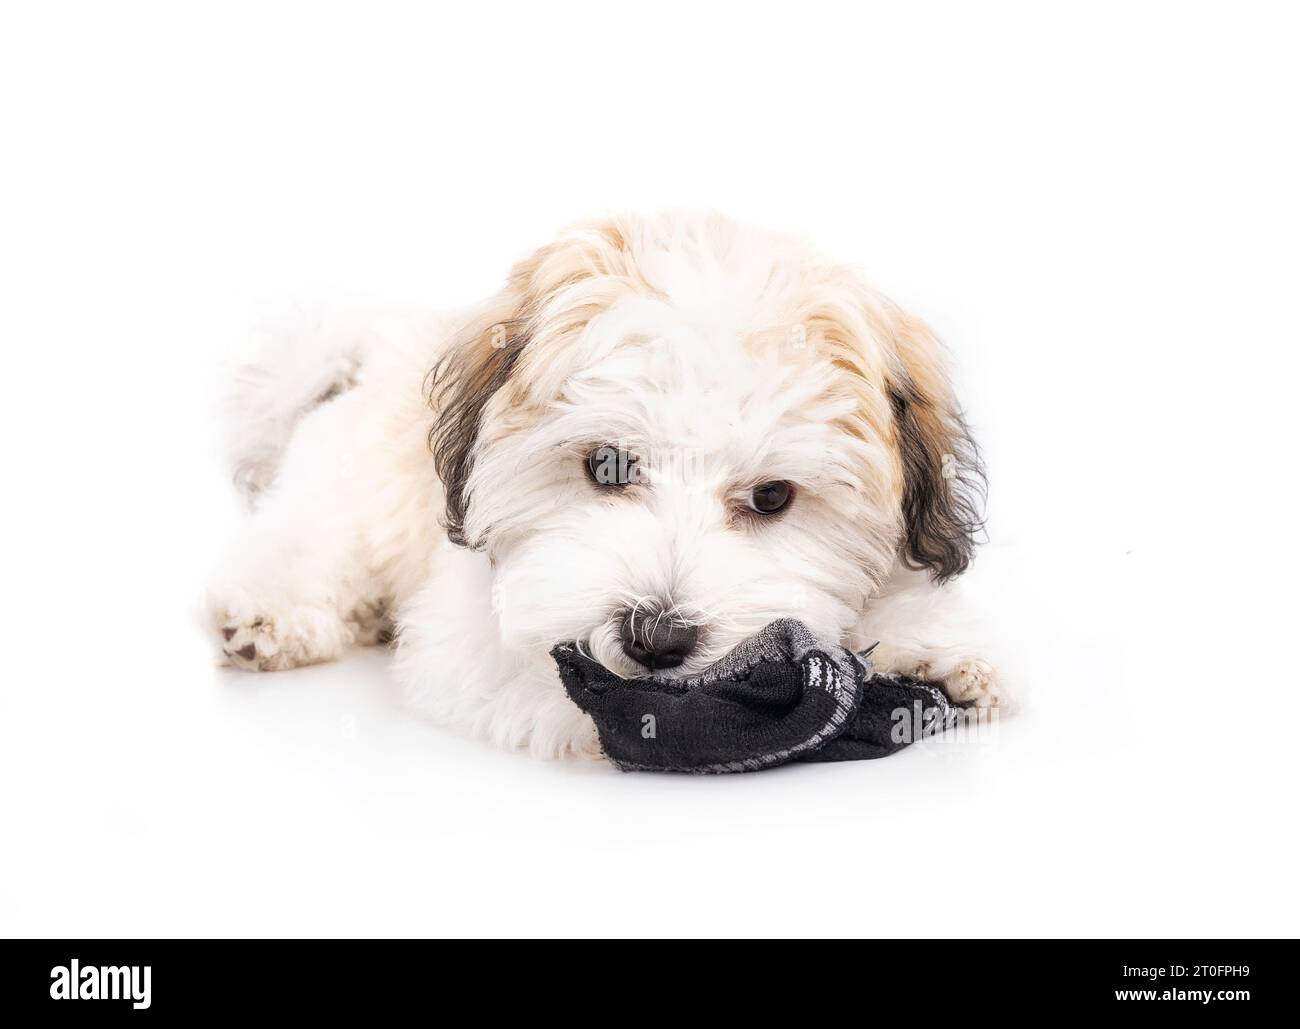 Cute puppy with sock in mouth. Small white puppy dog chewing, eating or playing with sock. Bad habit or unwanted behavior. 16 weeks old female Havanes Stock Photo